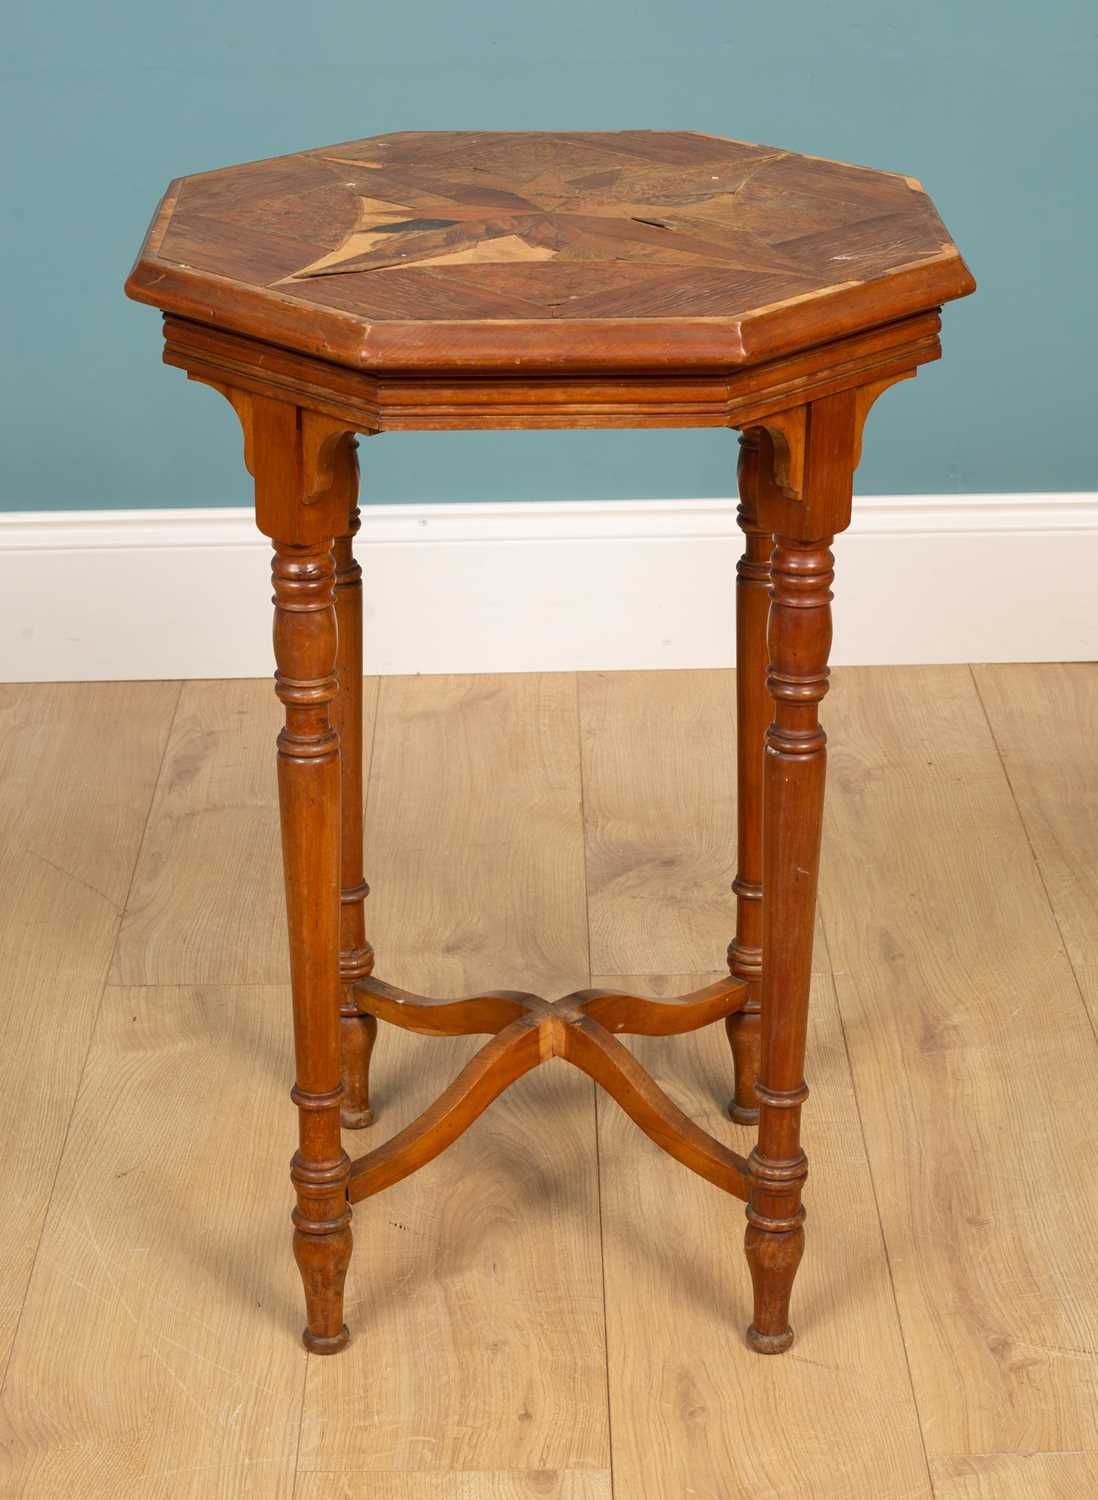 Lot 42 - A New Zealand native timbers octagonal specimen table in the manner of Anton Seuffert